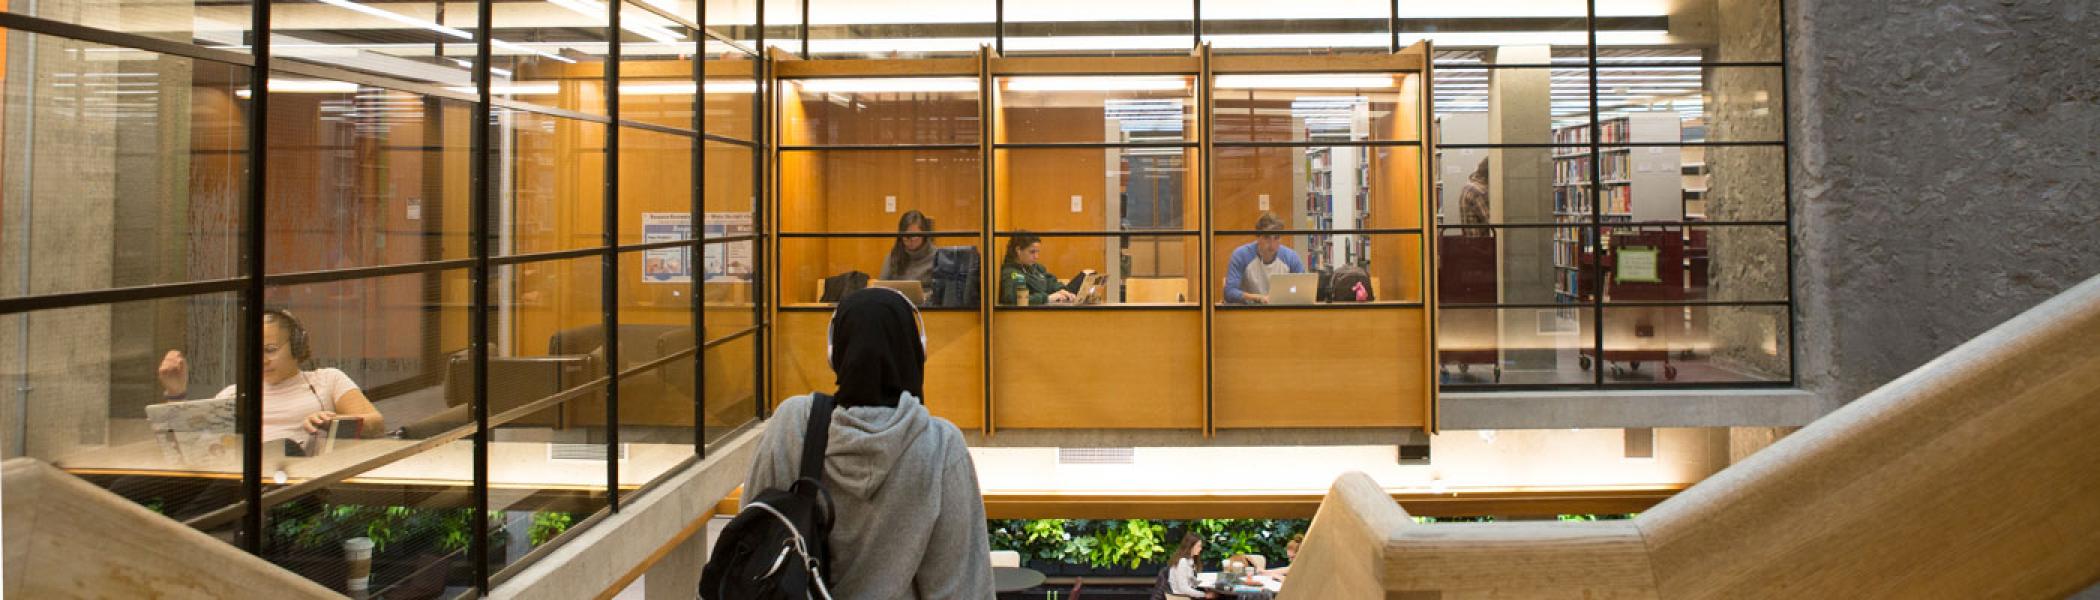 View from the top of the stairs at Bata library showing students working in study carols